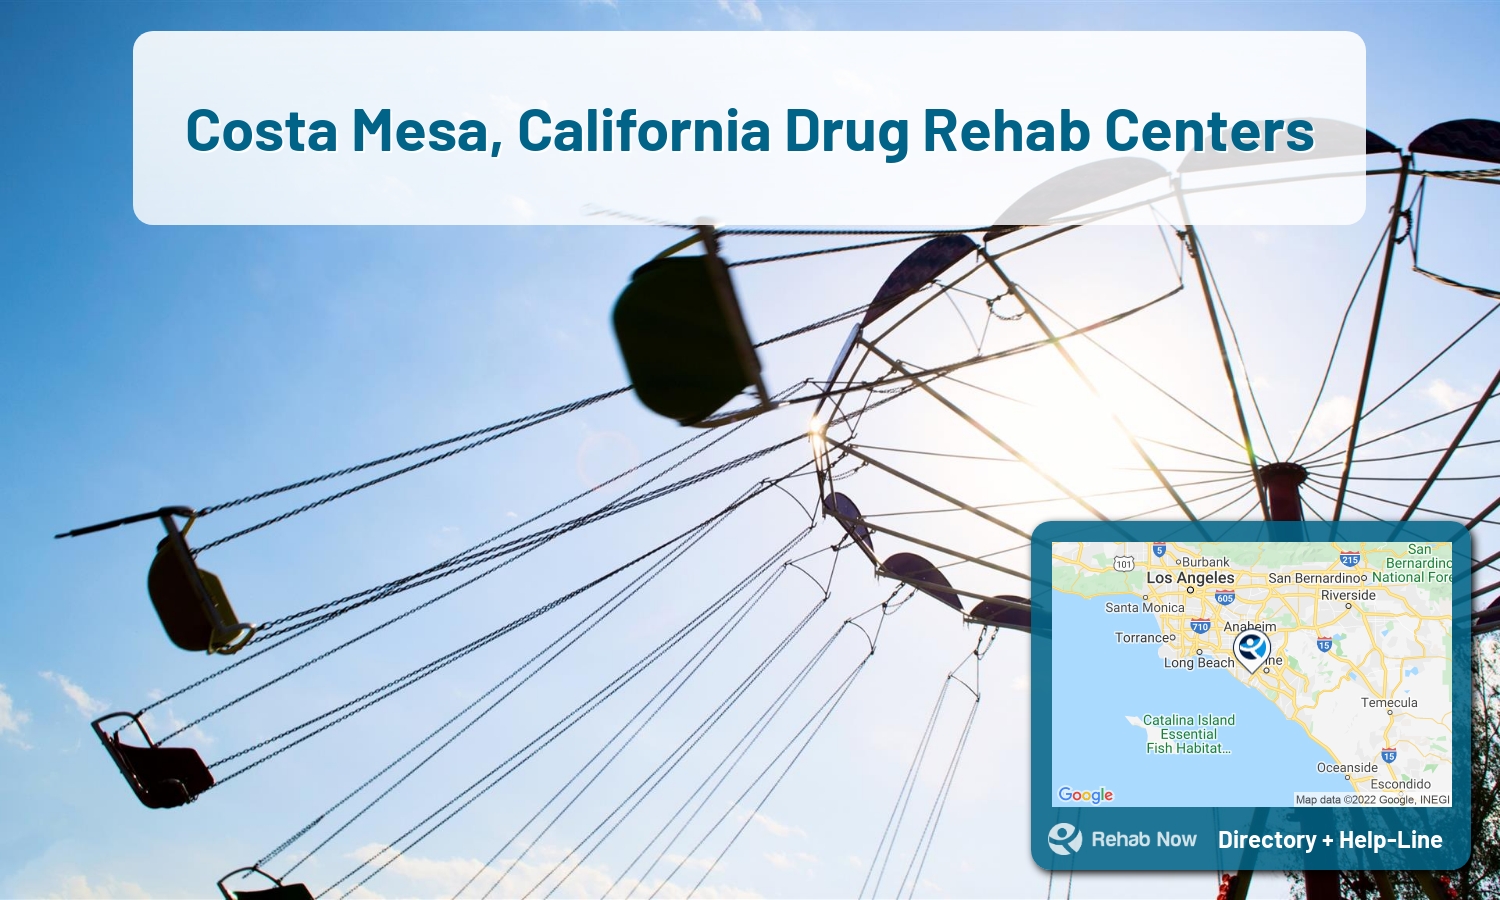 Costa Mesa, CA Treatment Centers. Find drug rehab in Costa Mesa, California, or detox and treatment programs. Get the right help now!